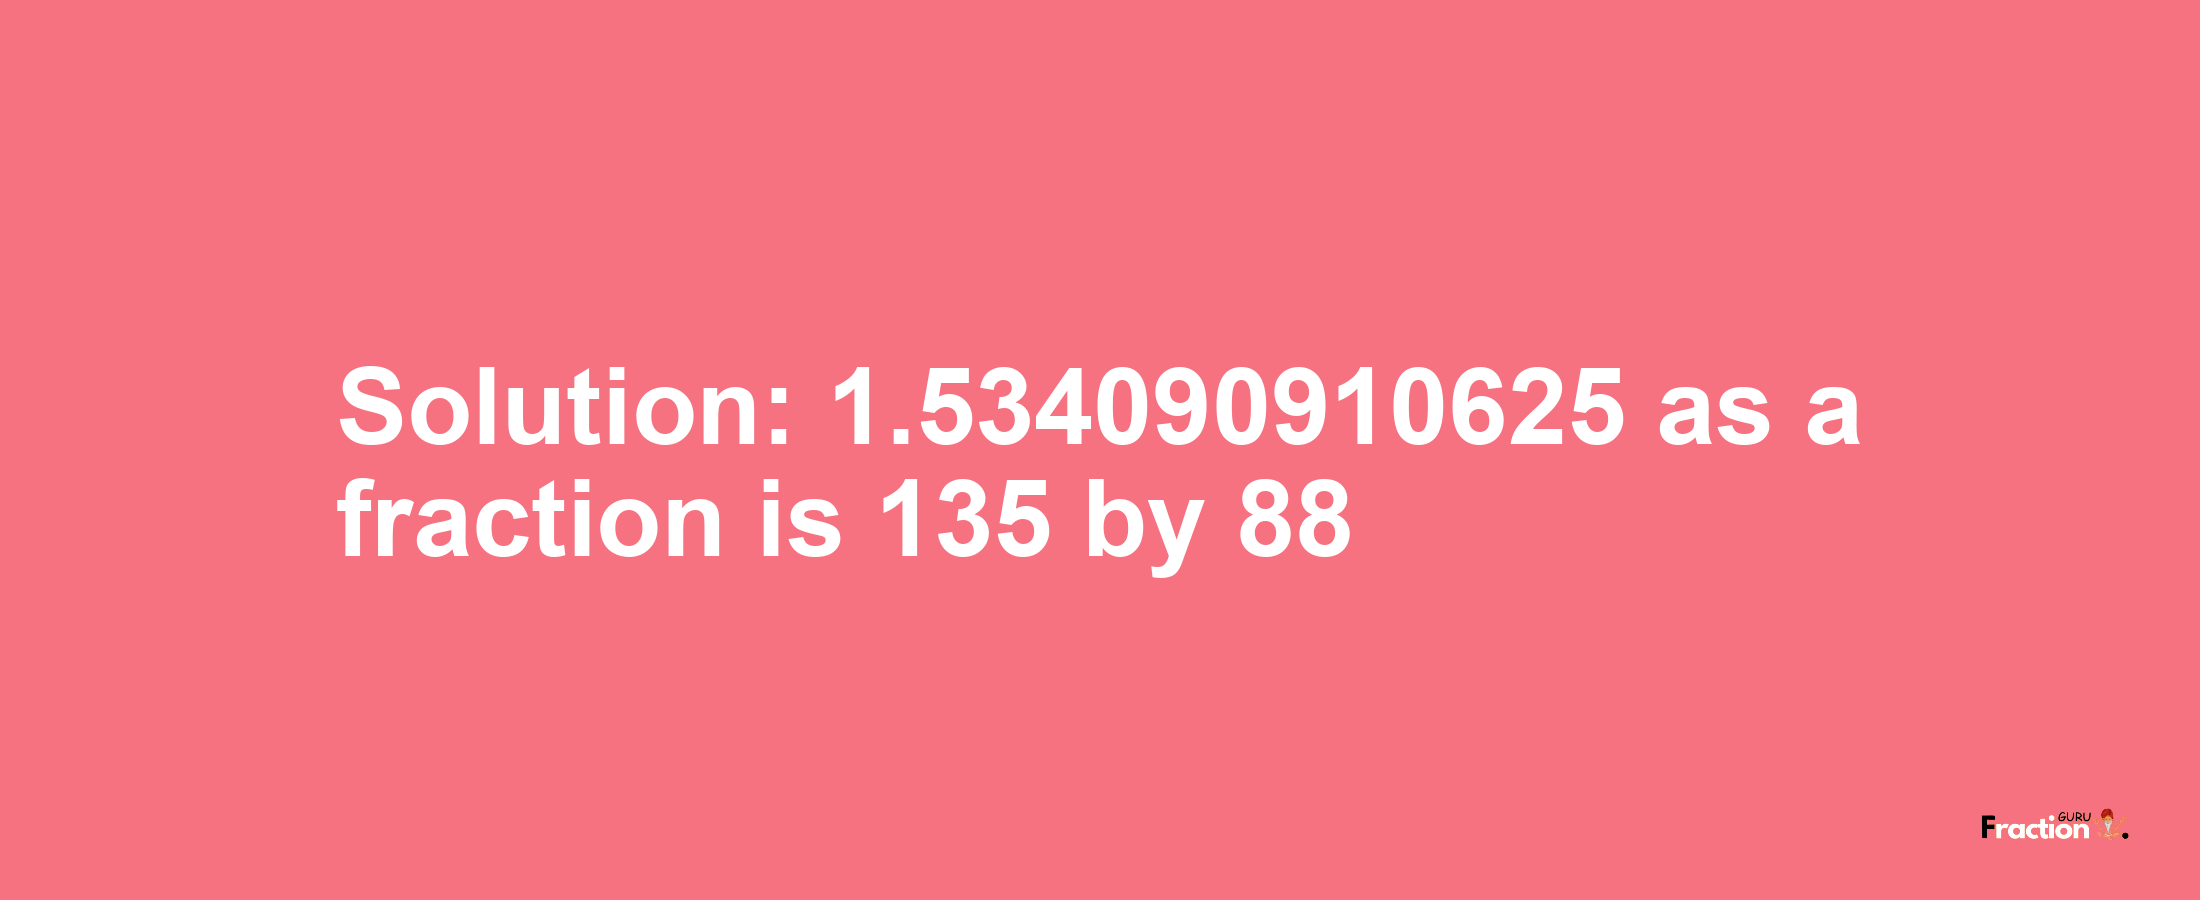 Solution:1.534090910625 as a fraction is 135/88